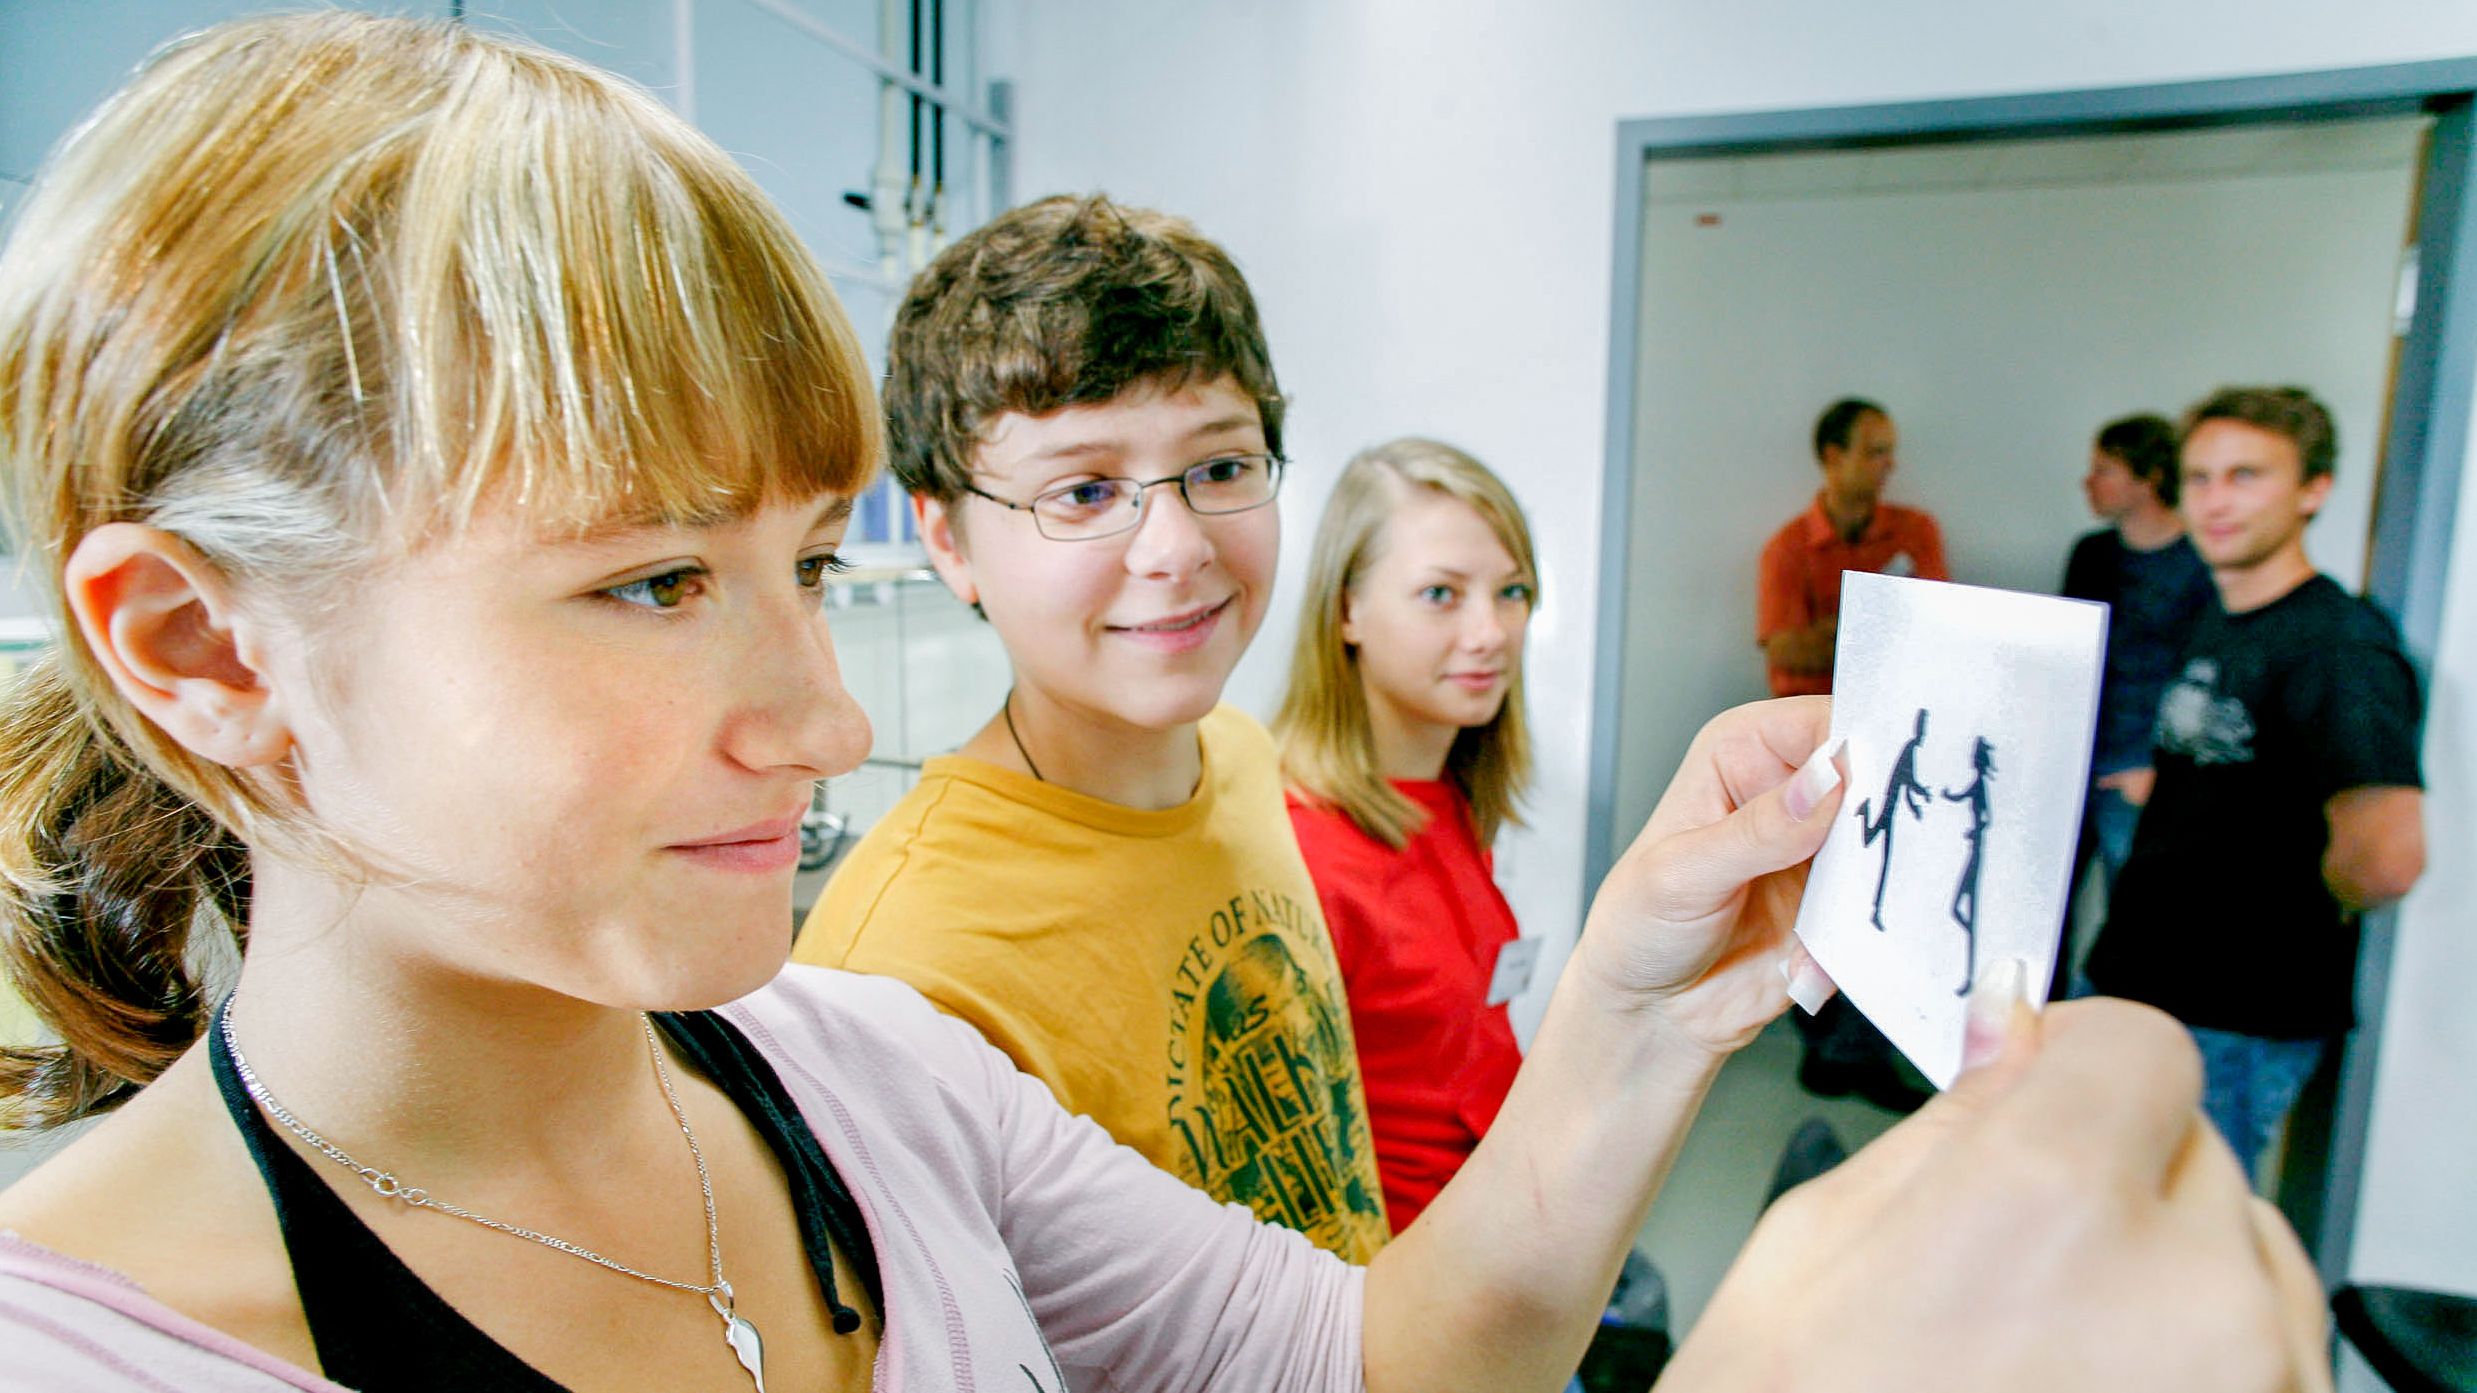 Several pupils are standing in a seminar room, the girl in the foreground is looking at a black and white drawing.